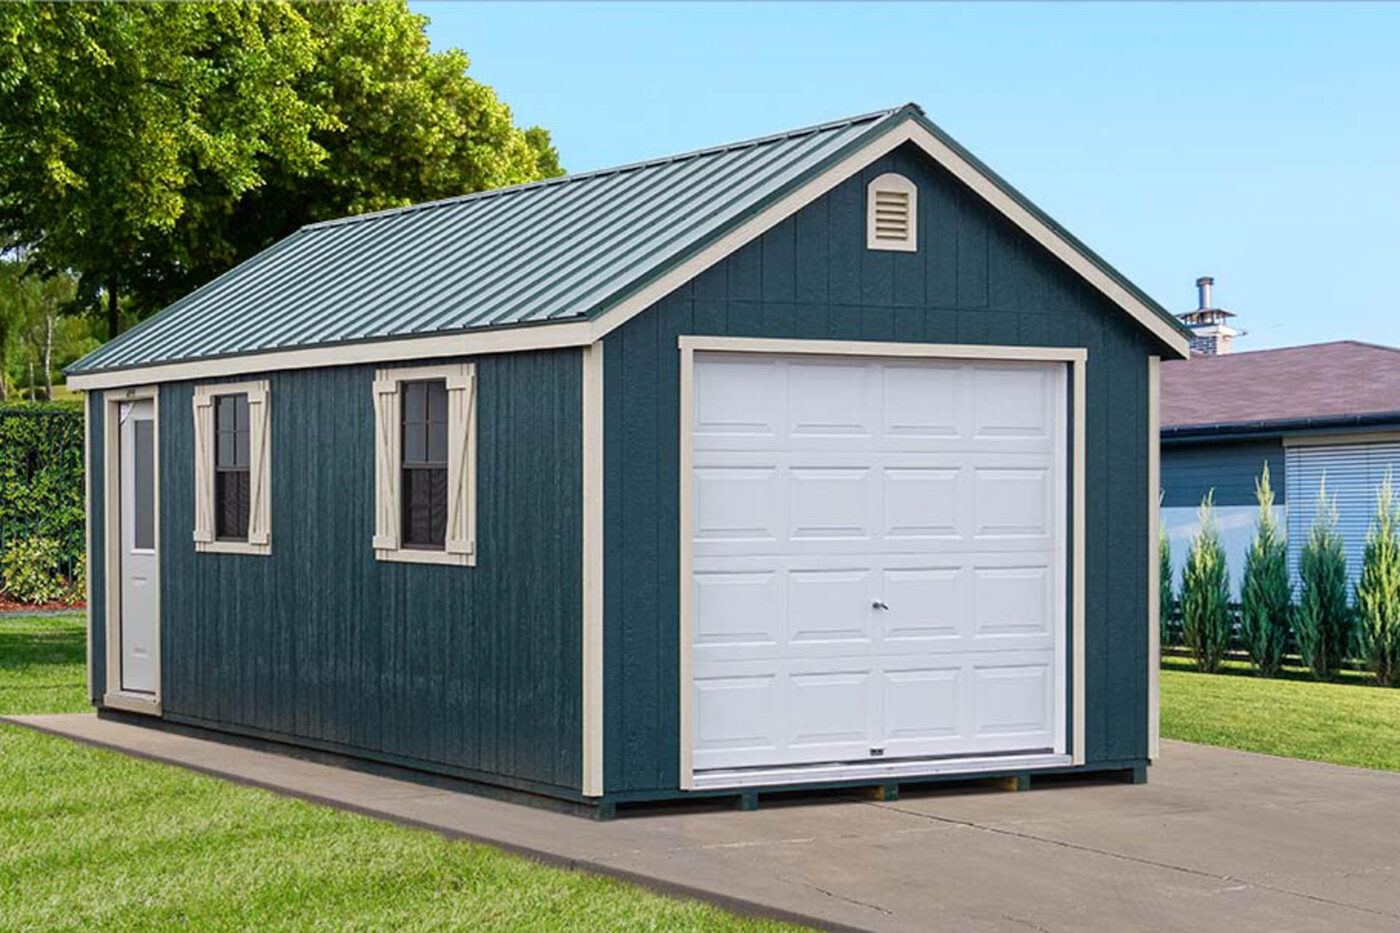 garages for sale in white sulphut springs, mt 2